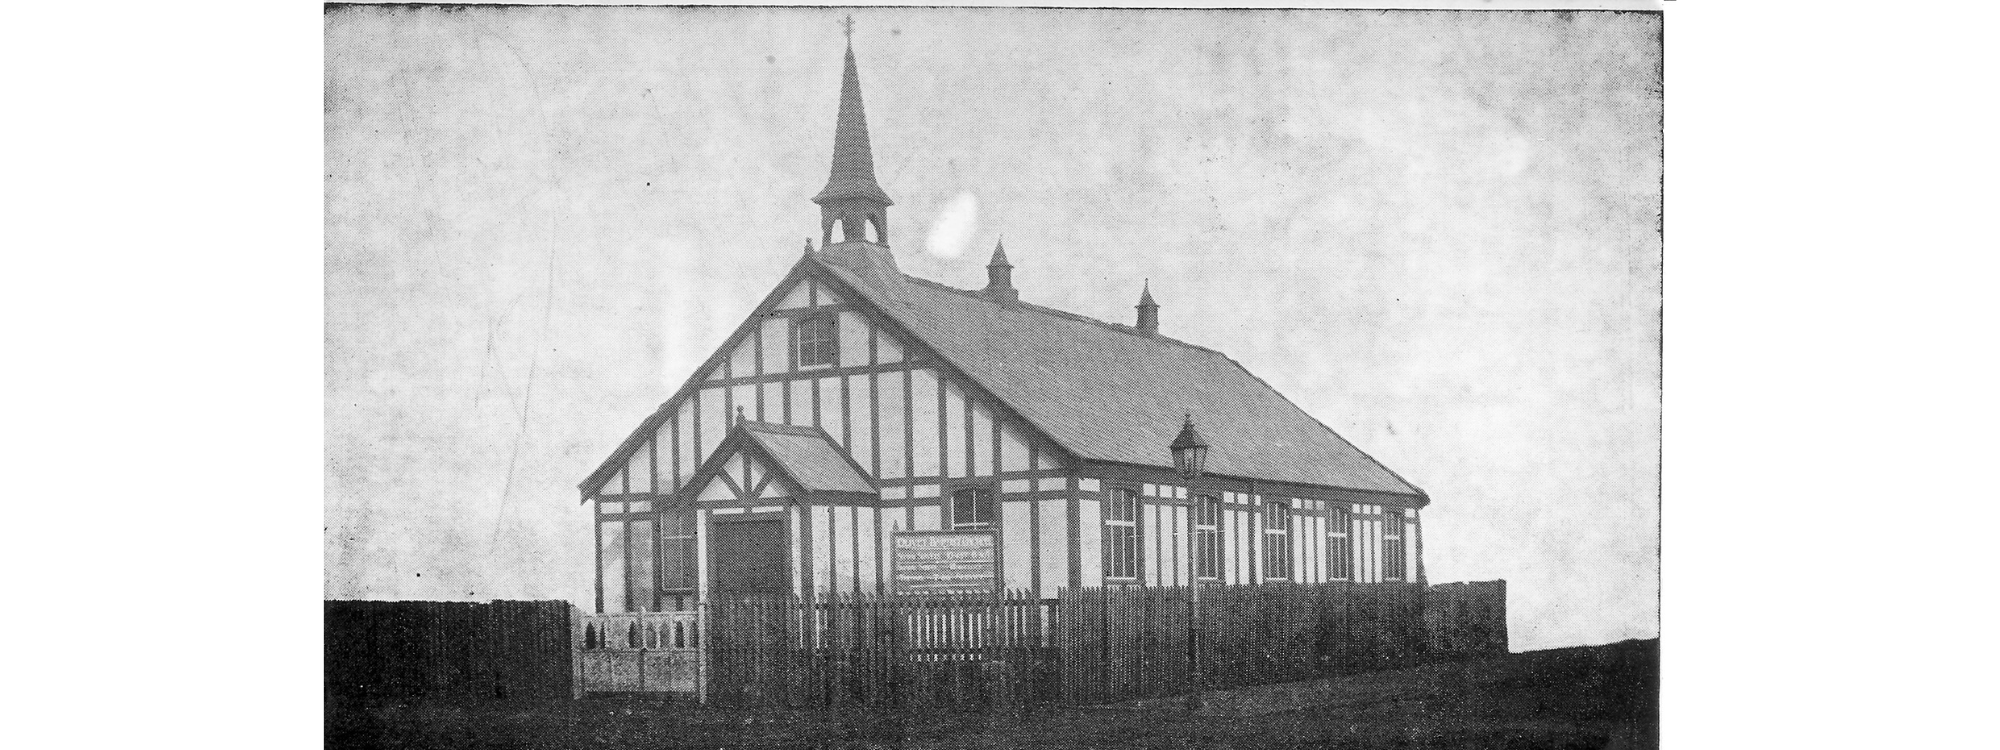 The first Olivet Baptist Church building, opened in 1915.